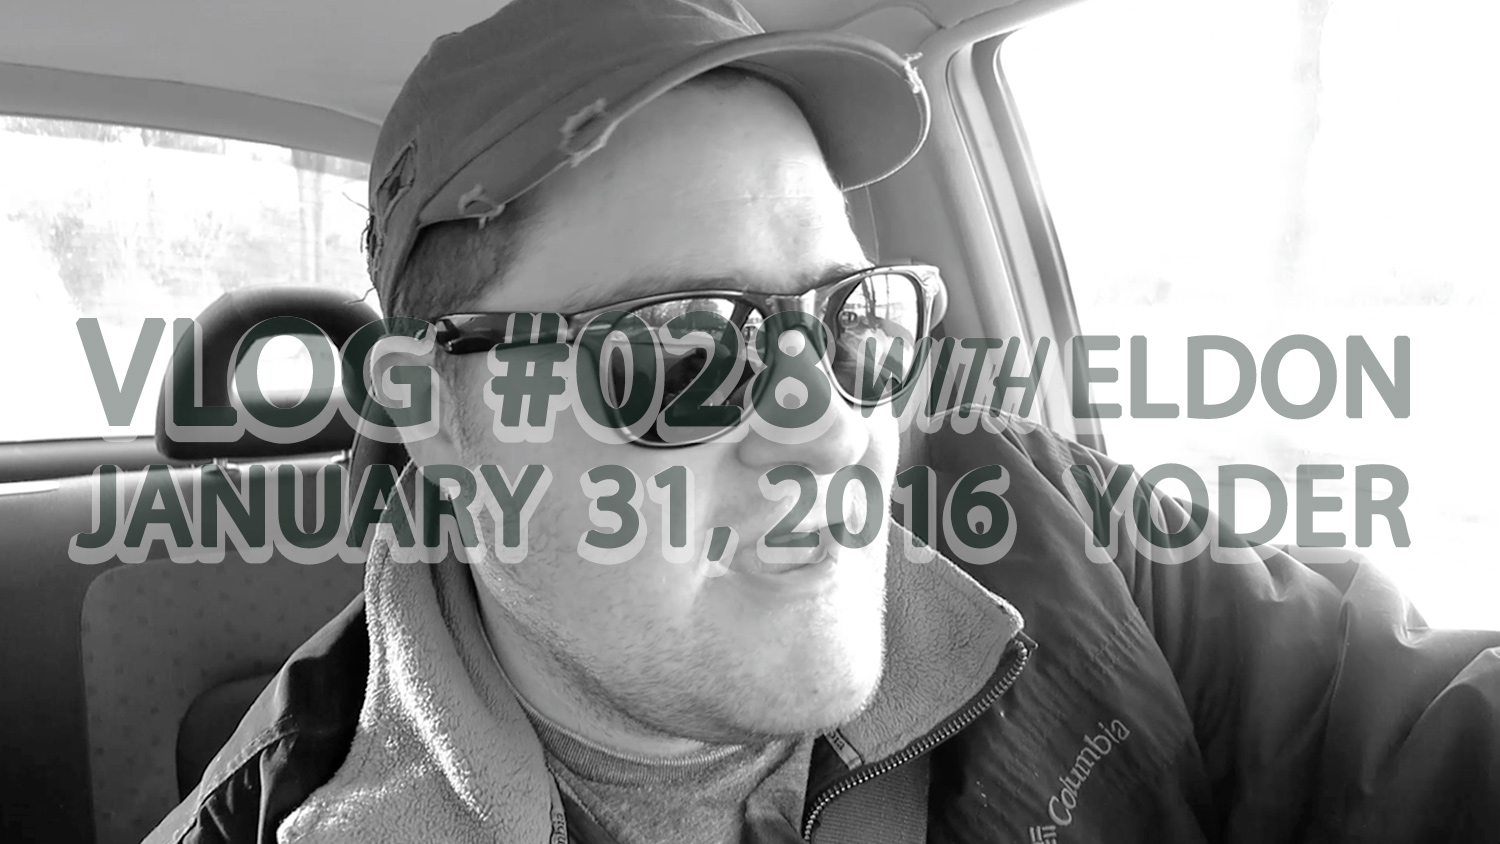 POSSIBLY THE BEST ONE YET - VLOG #028